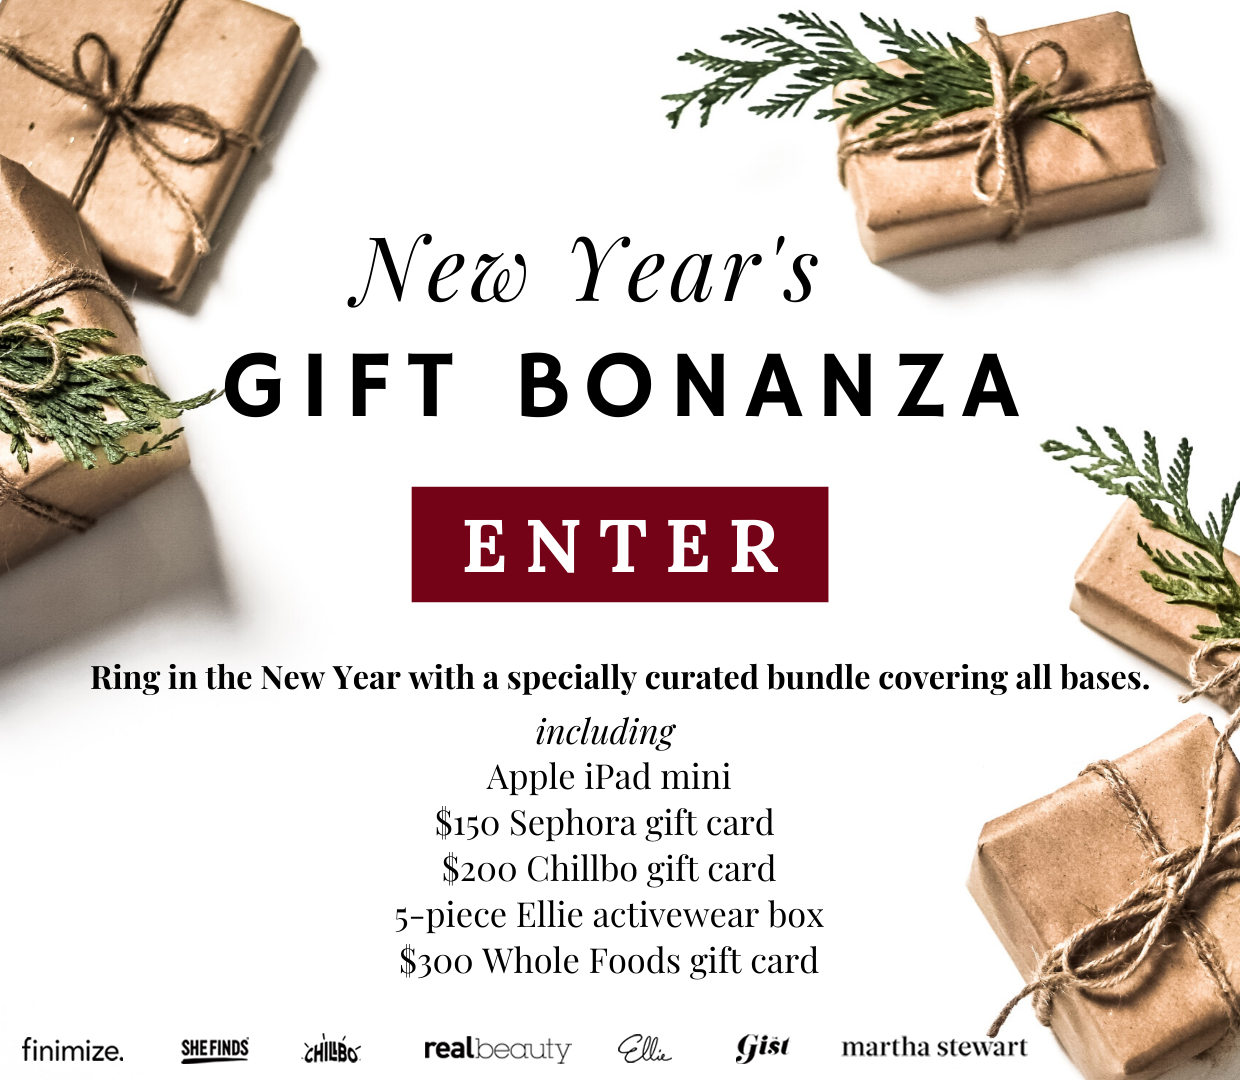 Ring in the New Year with a specially curated gift bundle: an Apple iPad mini, $150 Sephora gift card, $200 Chillbo gift card, a 5-piece Ellie activewear box, and a $300 Whole Foods gift card. Enter now!